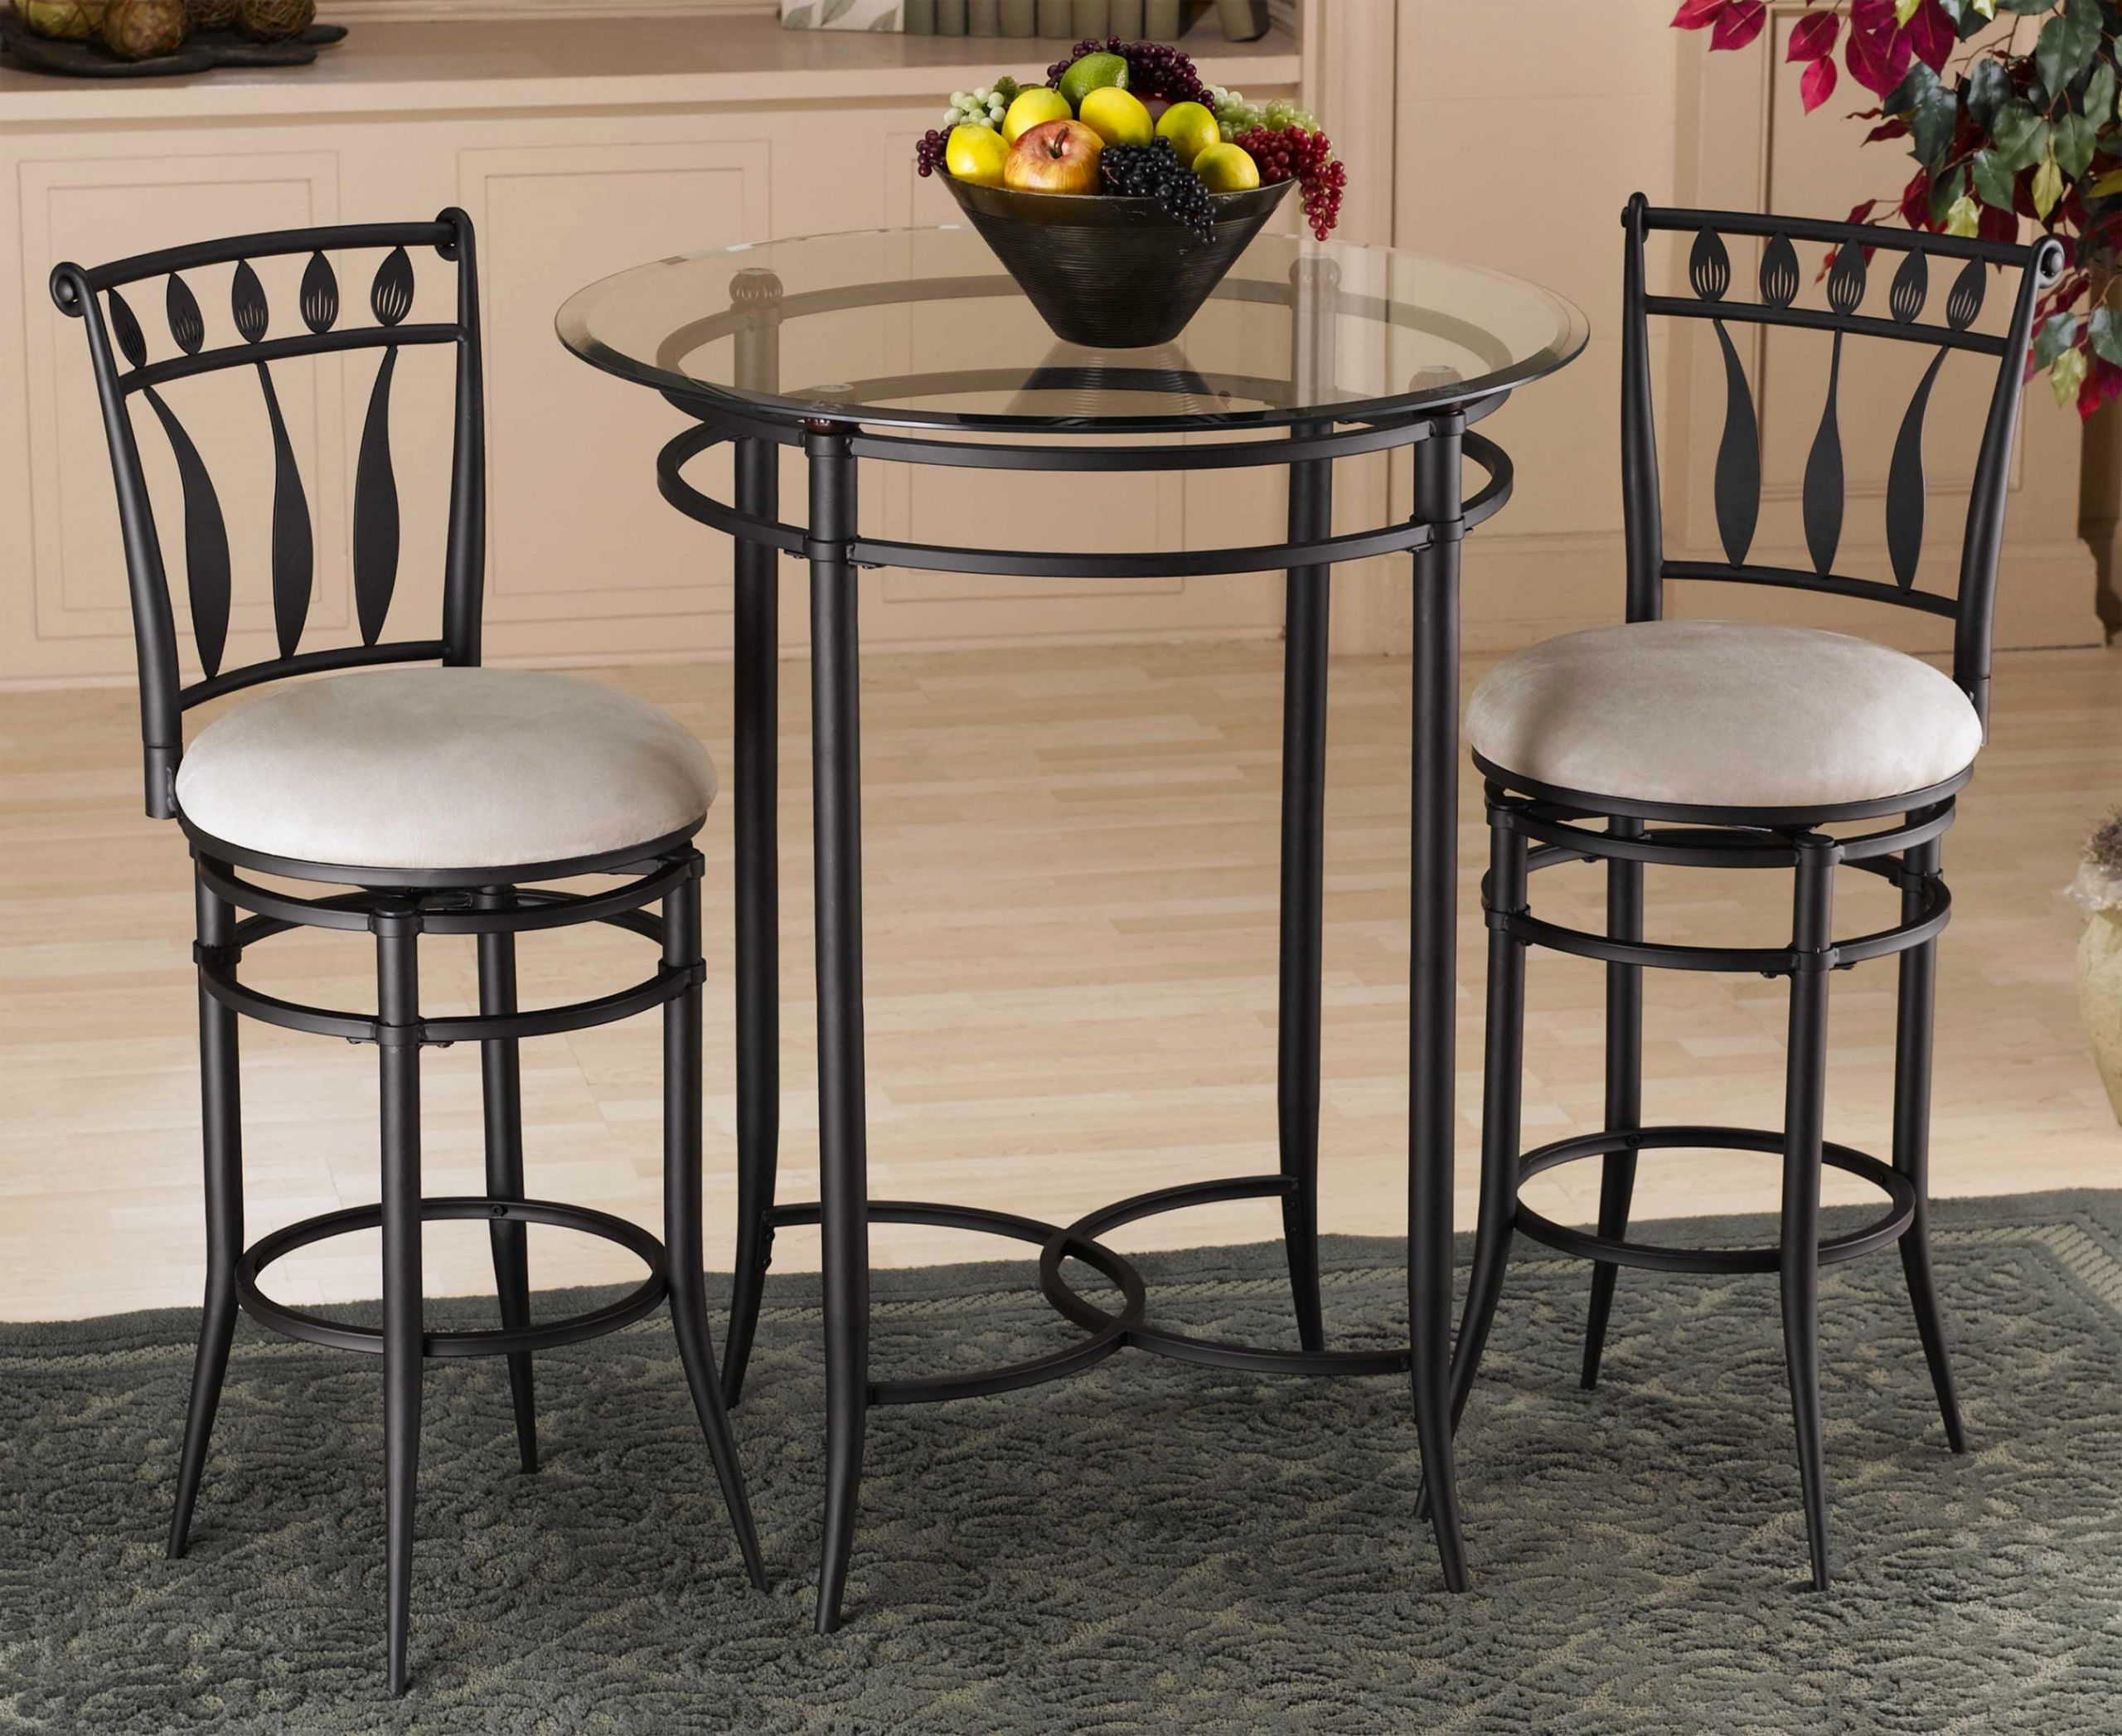 Small Bistro Tables For Kitchen
 Table And Chairs Argos Small Bistro Set For Kitchen Round